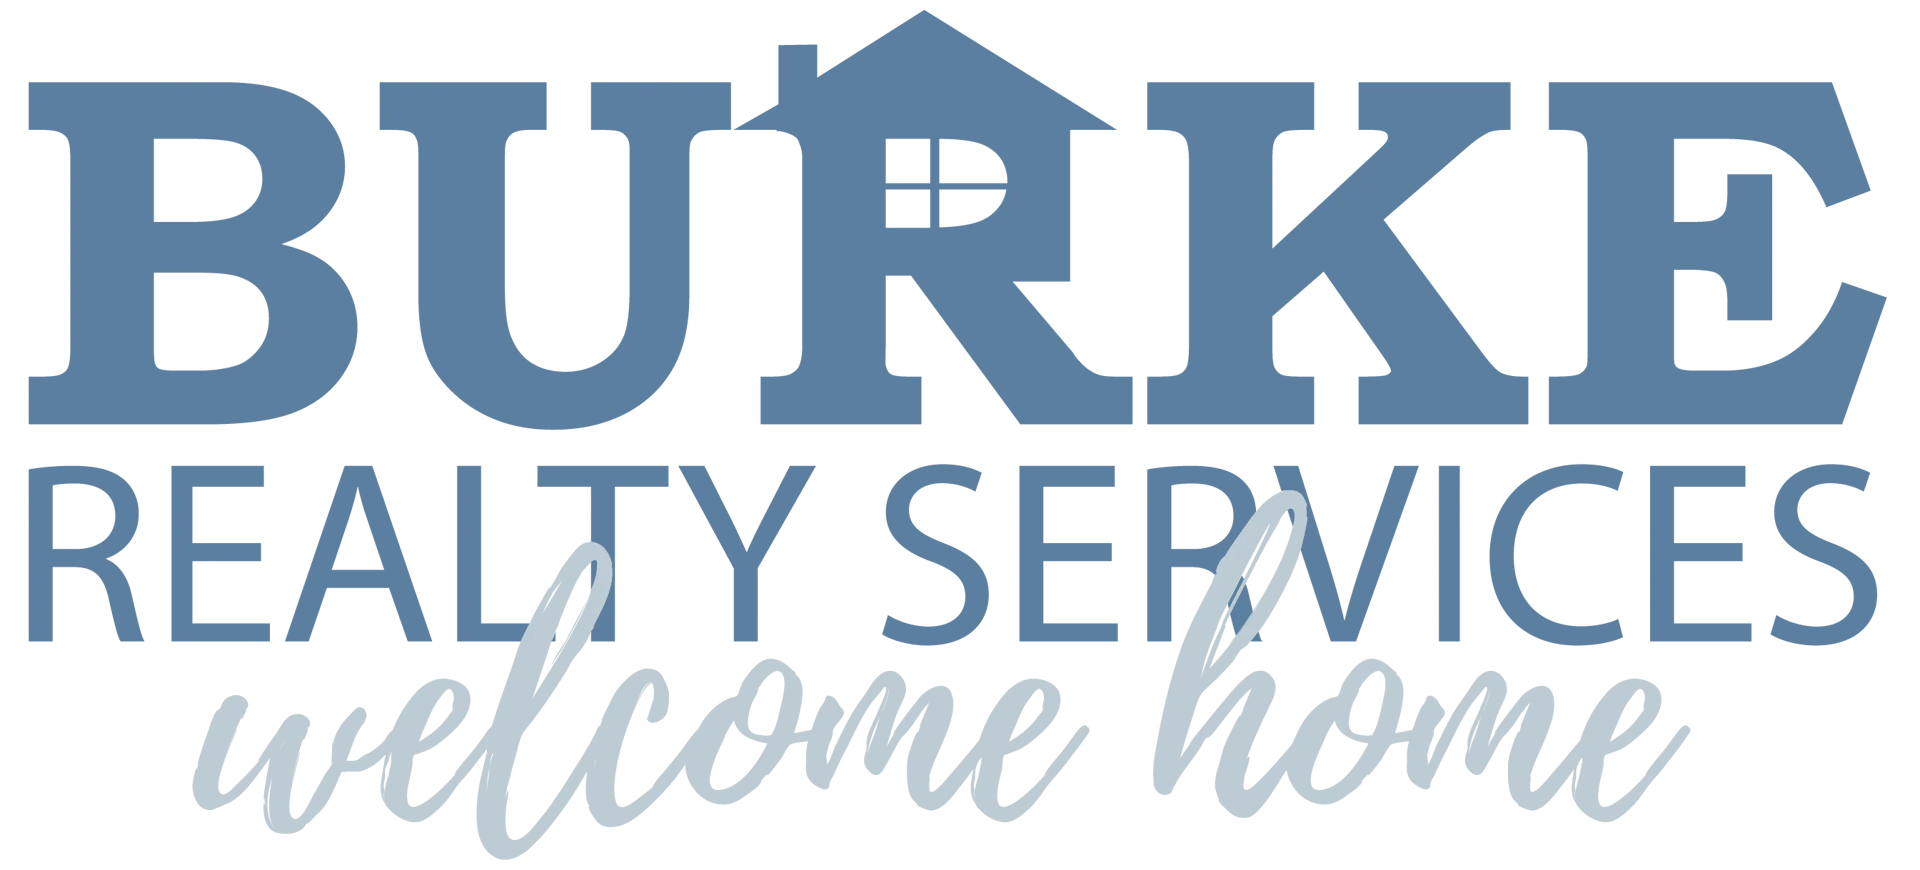 Burke Realty Group powered by Keller Williams Realty Signature